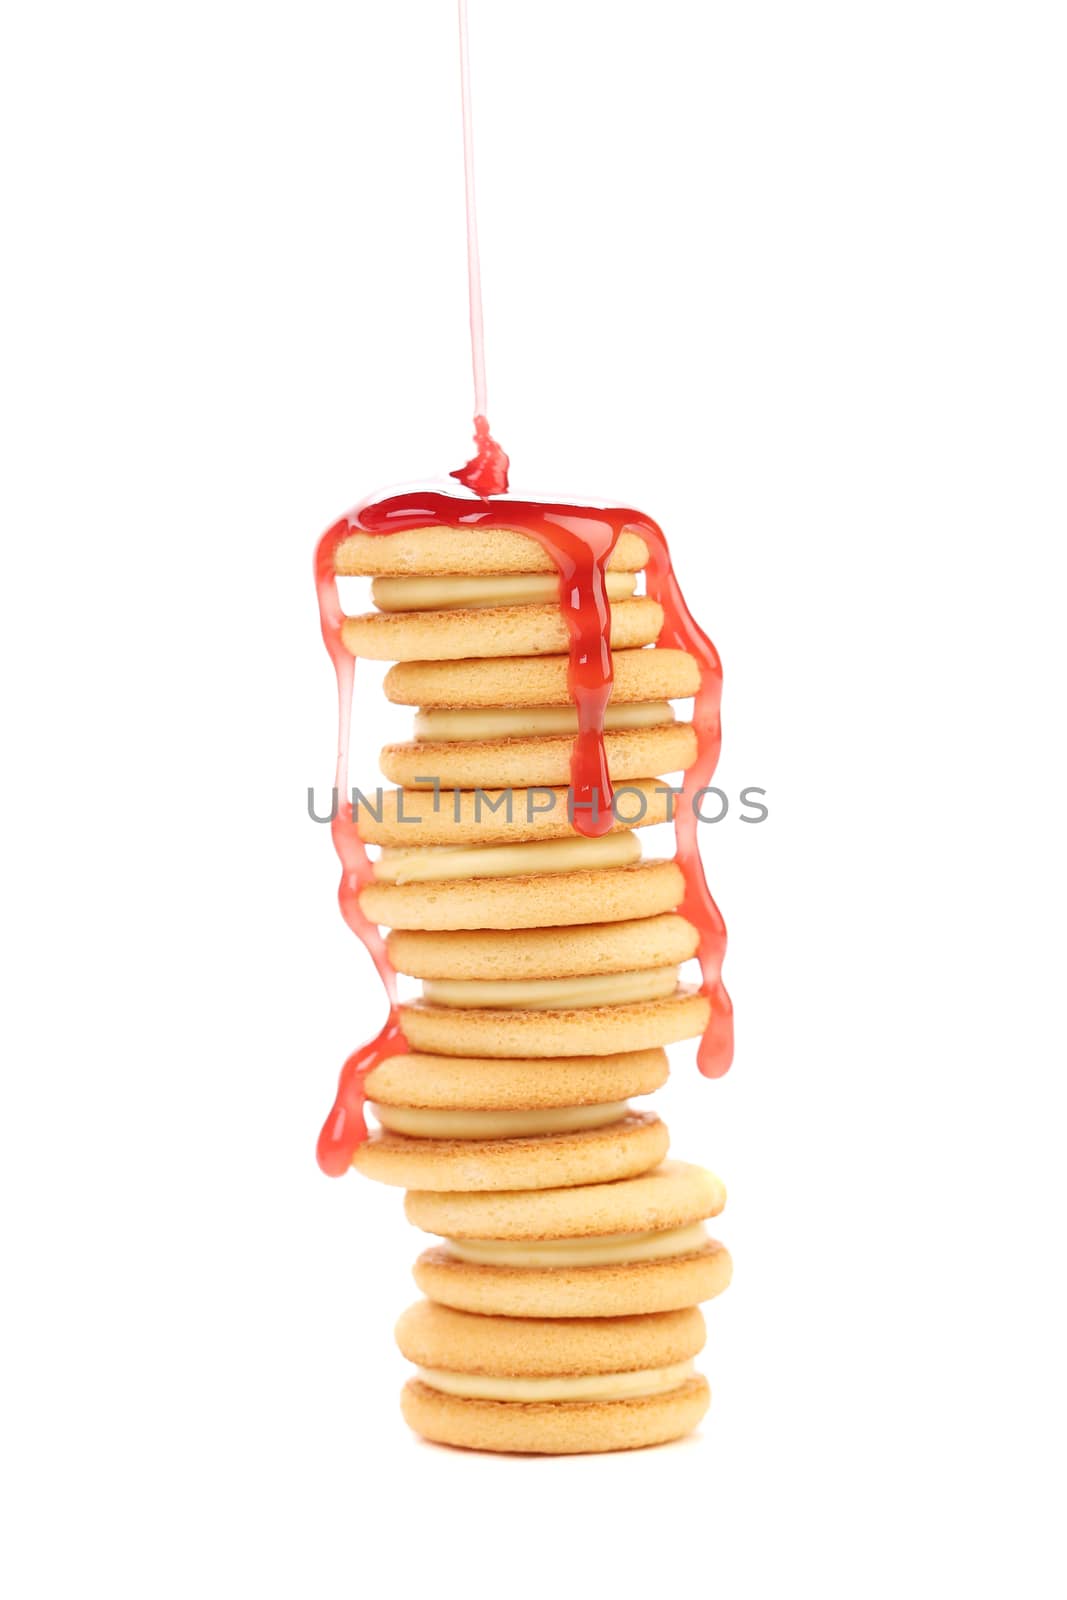 Stack of cookie biscuits with filling in strawberry sauce. On a white background